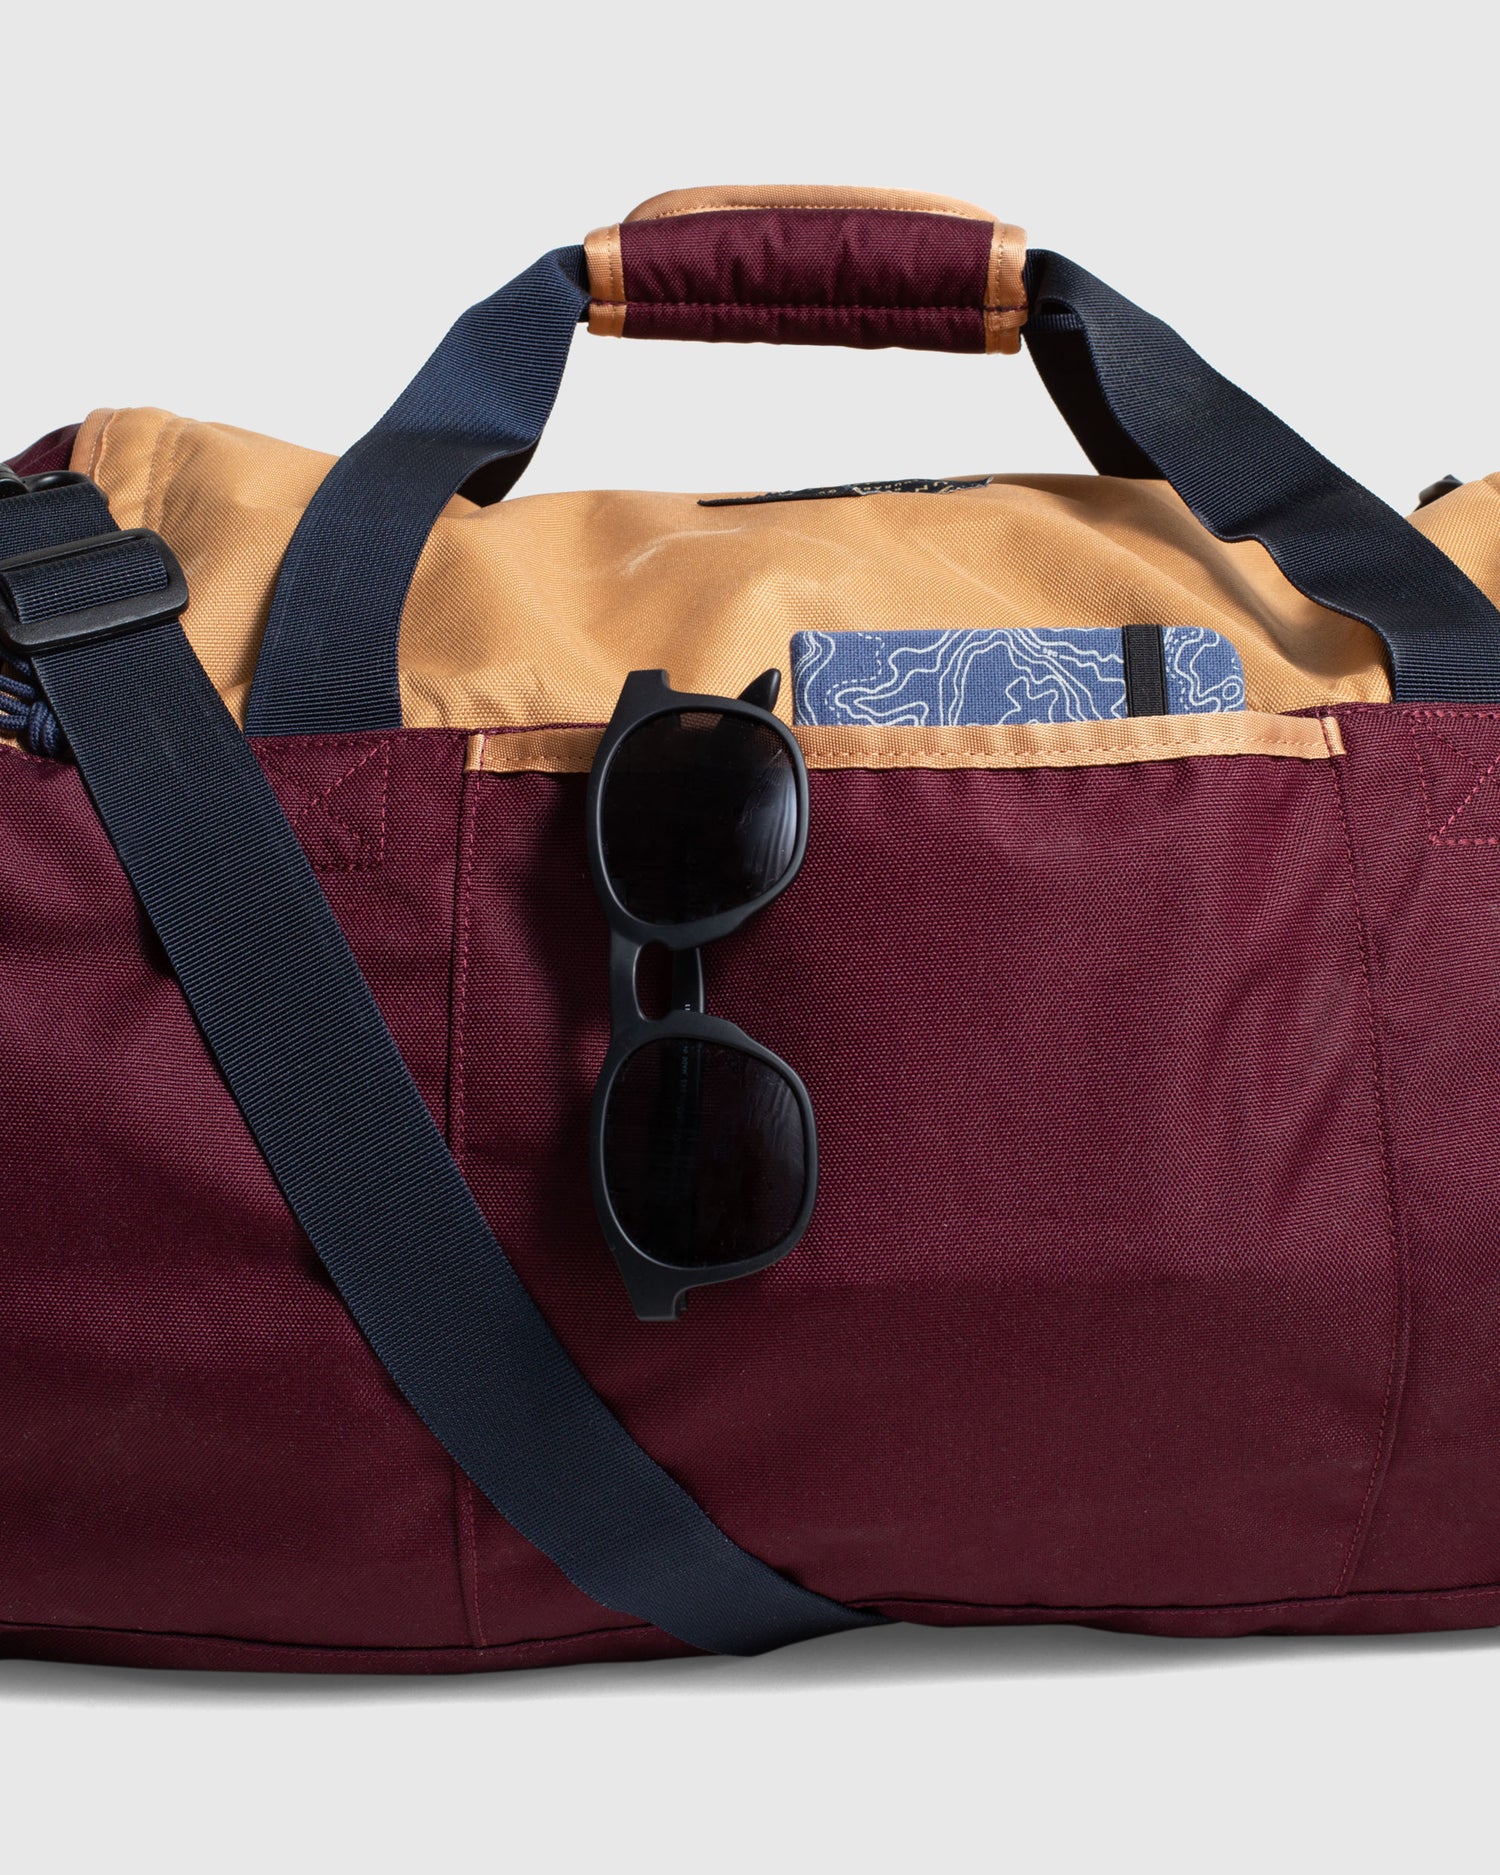 Pocket of duffle bag by United by Blue